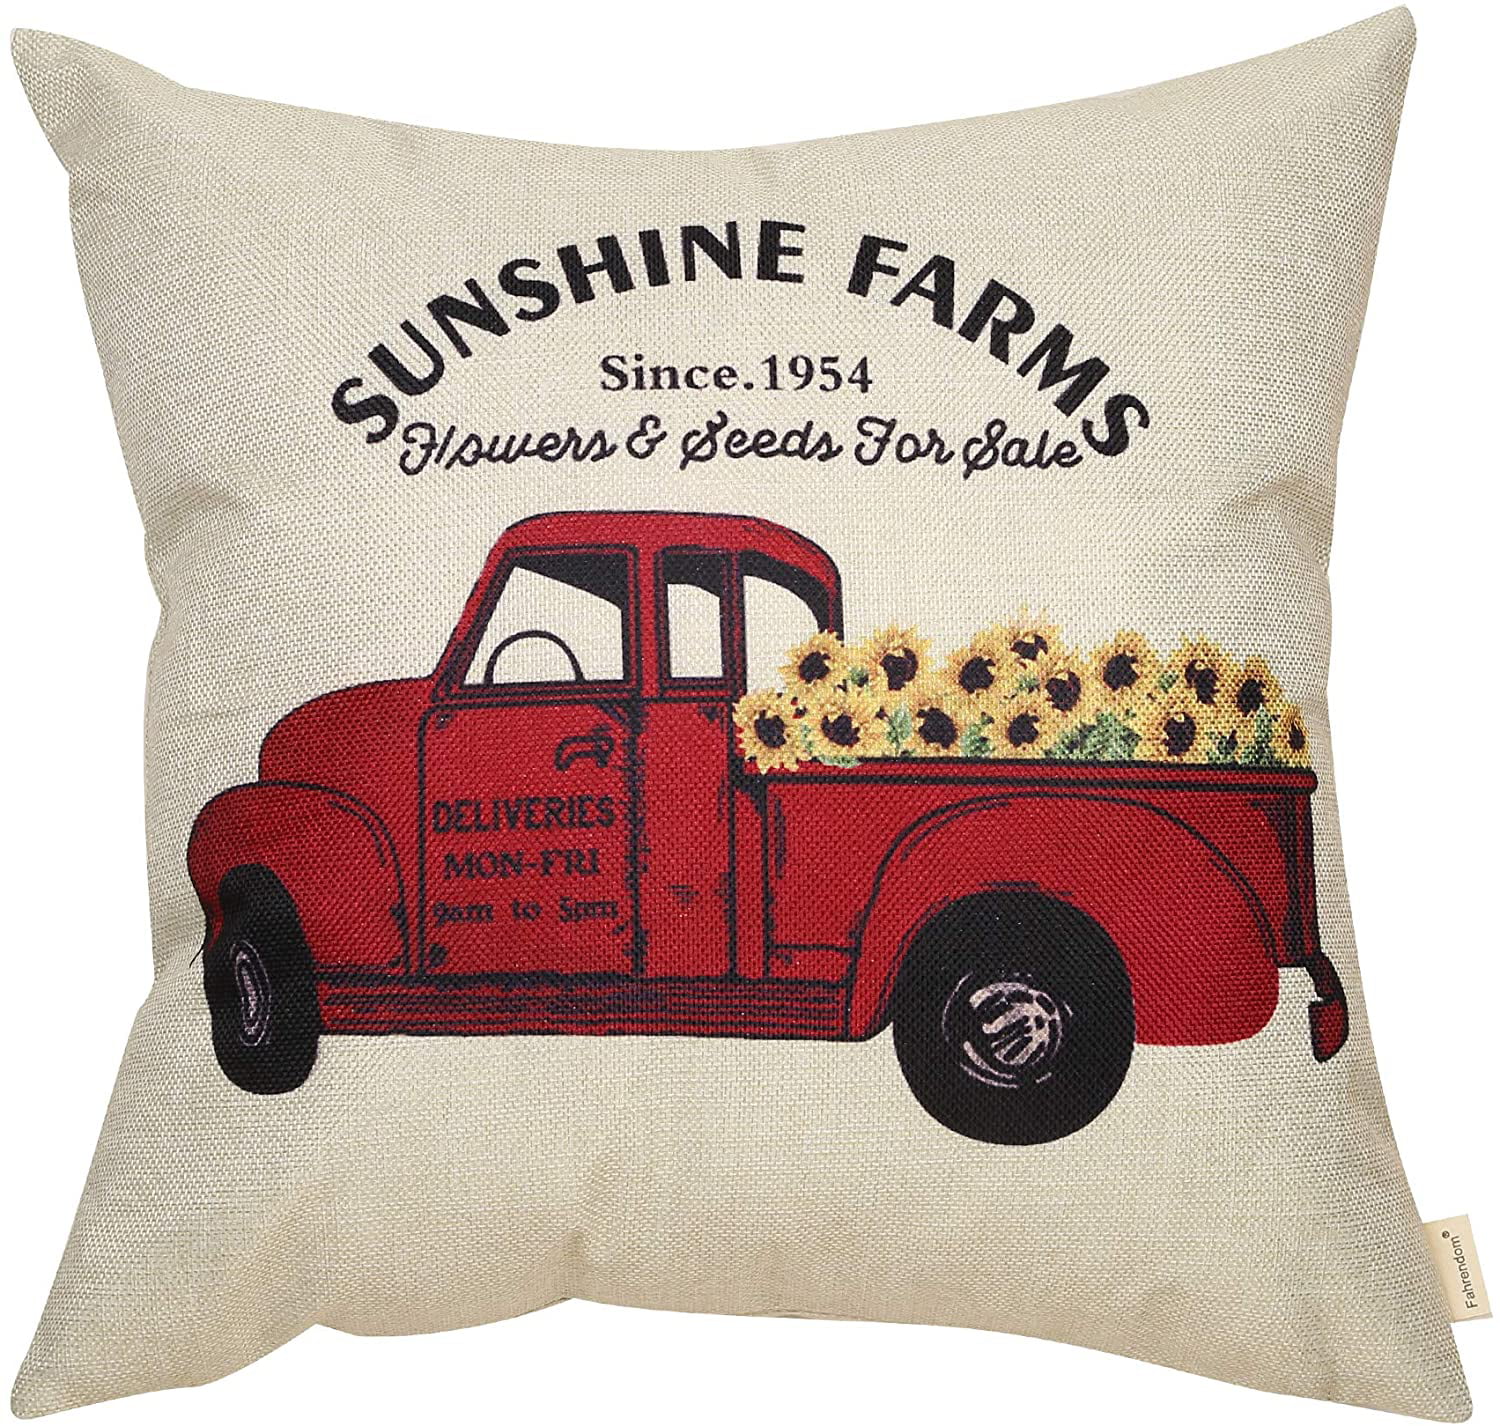 Softxpp Spring Flower Truck Decorative Throw Pillow Cover Home Farmhouse Decorations Cotton Linen Square Pillowcase Decor for Sofa Couch 18 x 18 Yellow Buffalo Plaid Check Tulips Sign Cushion Case